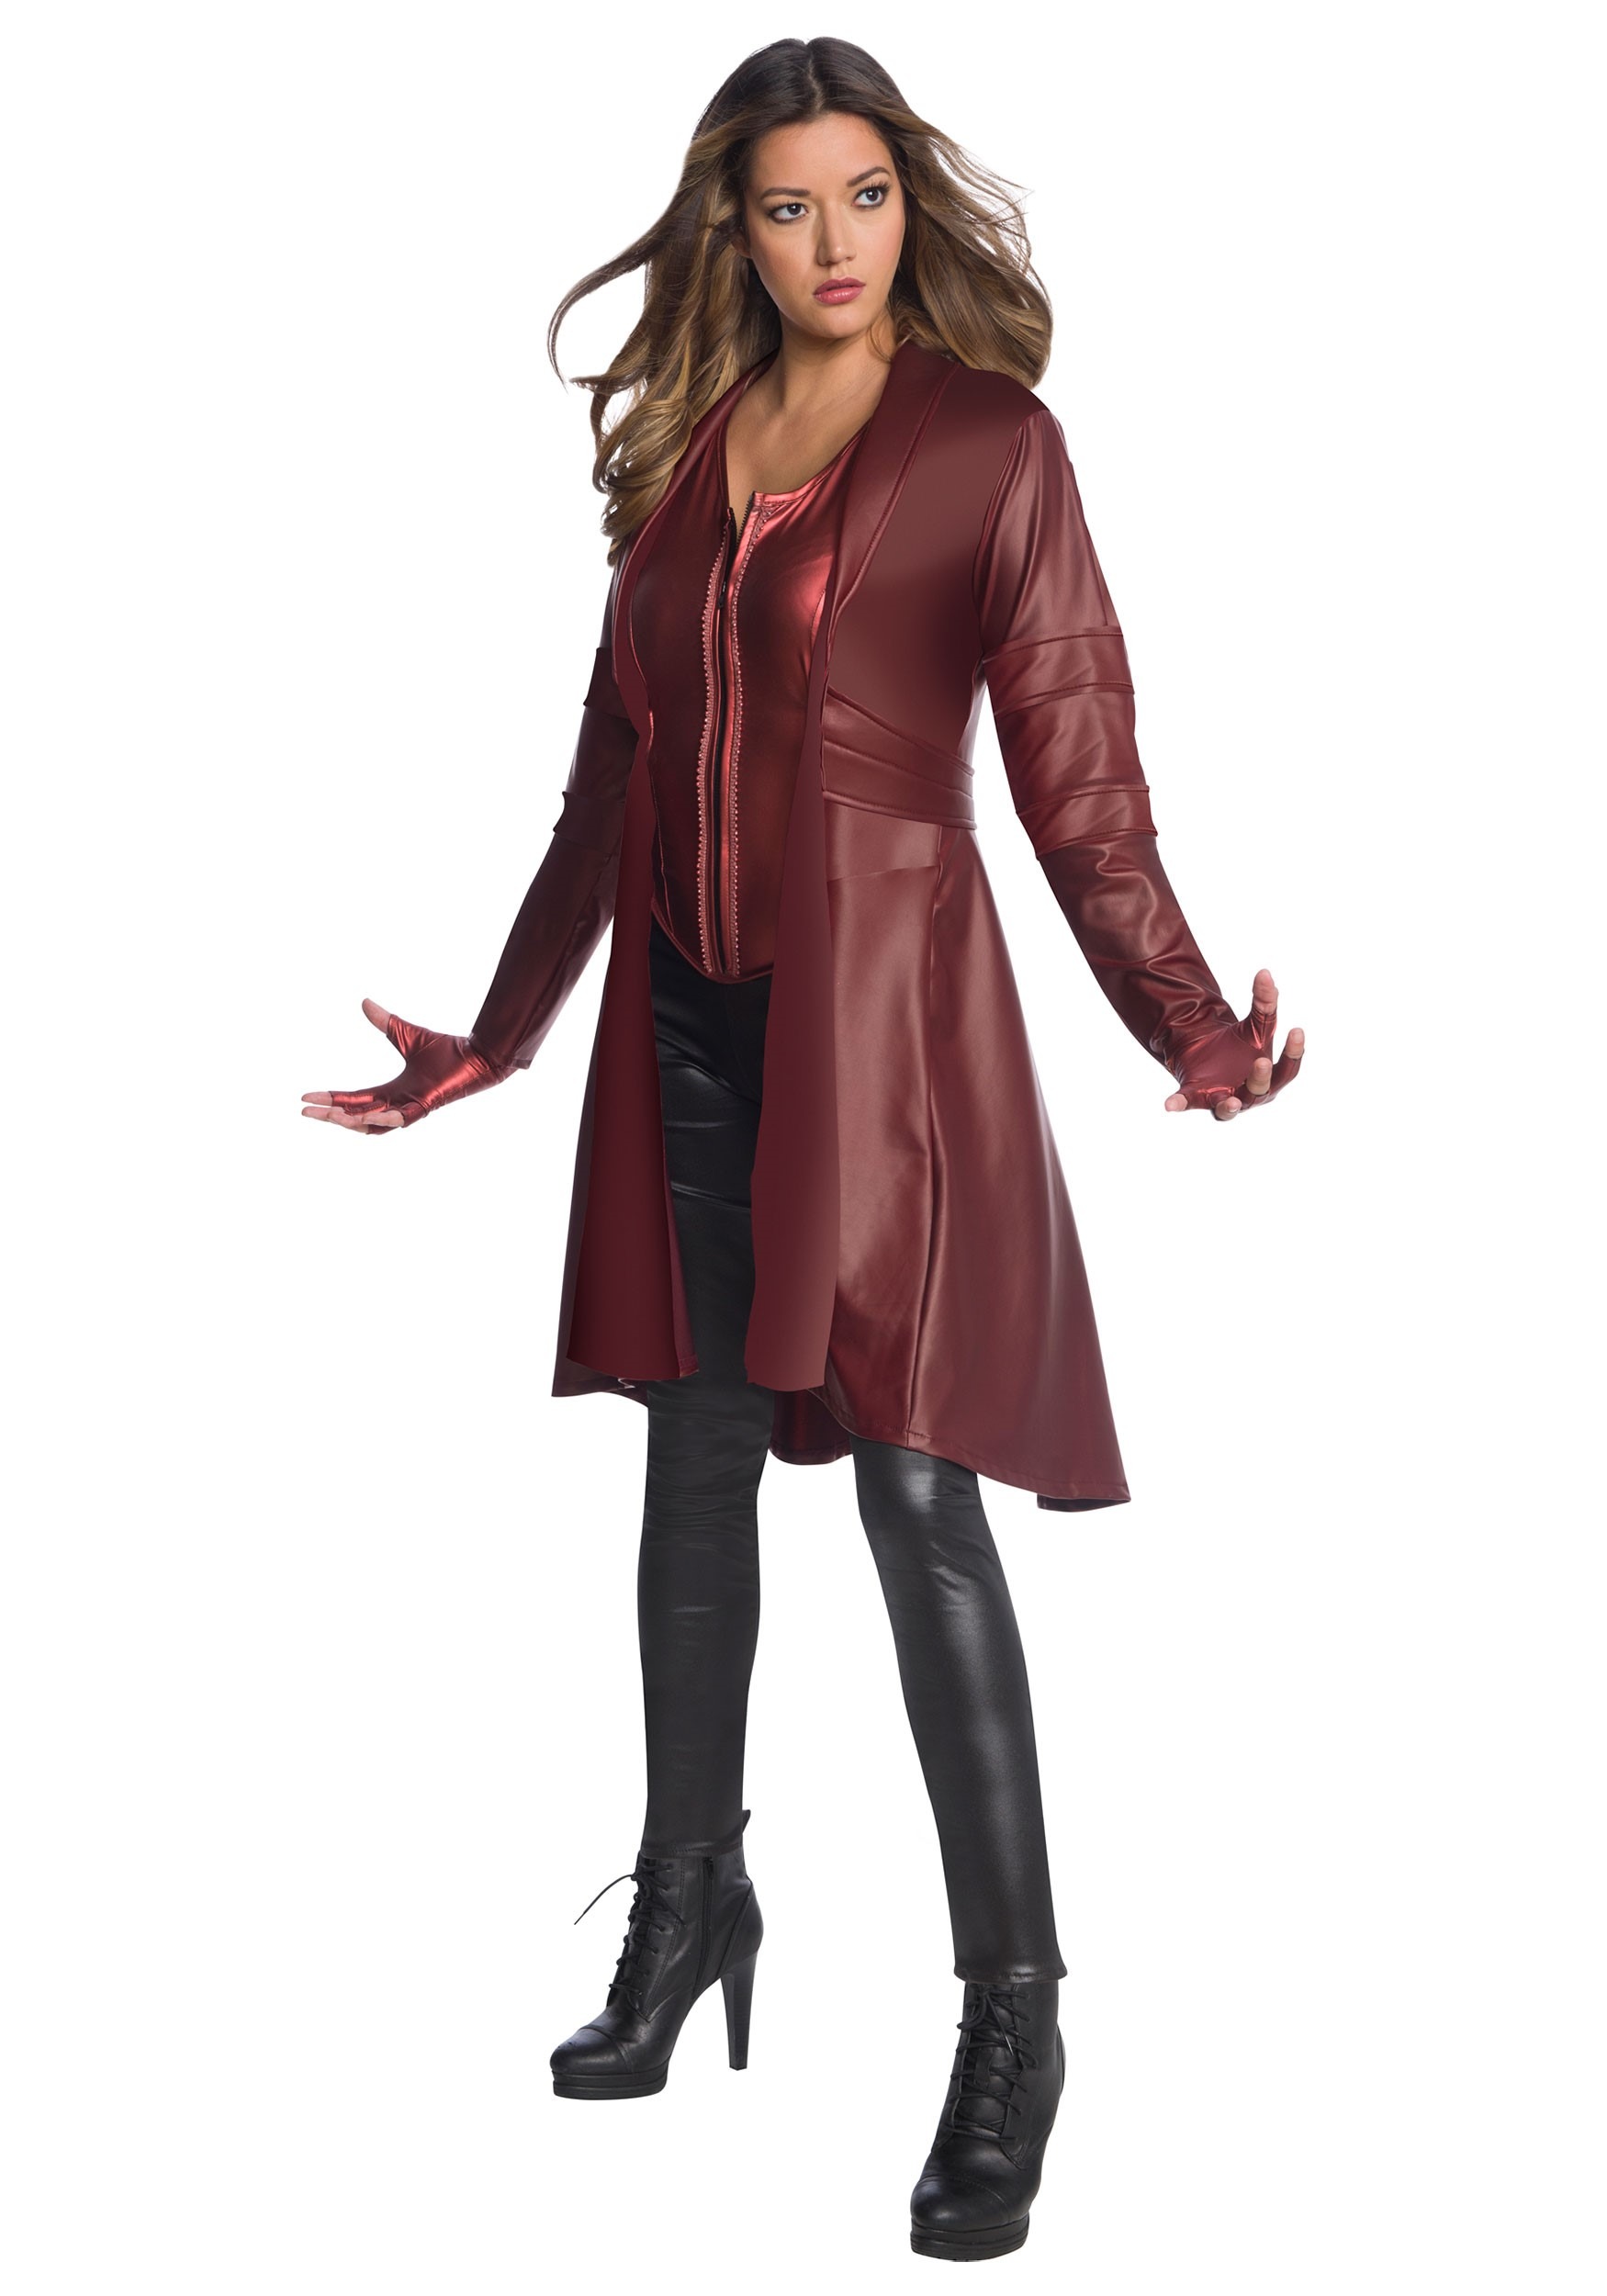 Avengers Endgame Secret Wishes Scarlet Witch Women's Costume